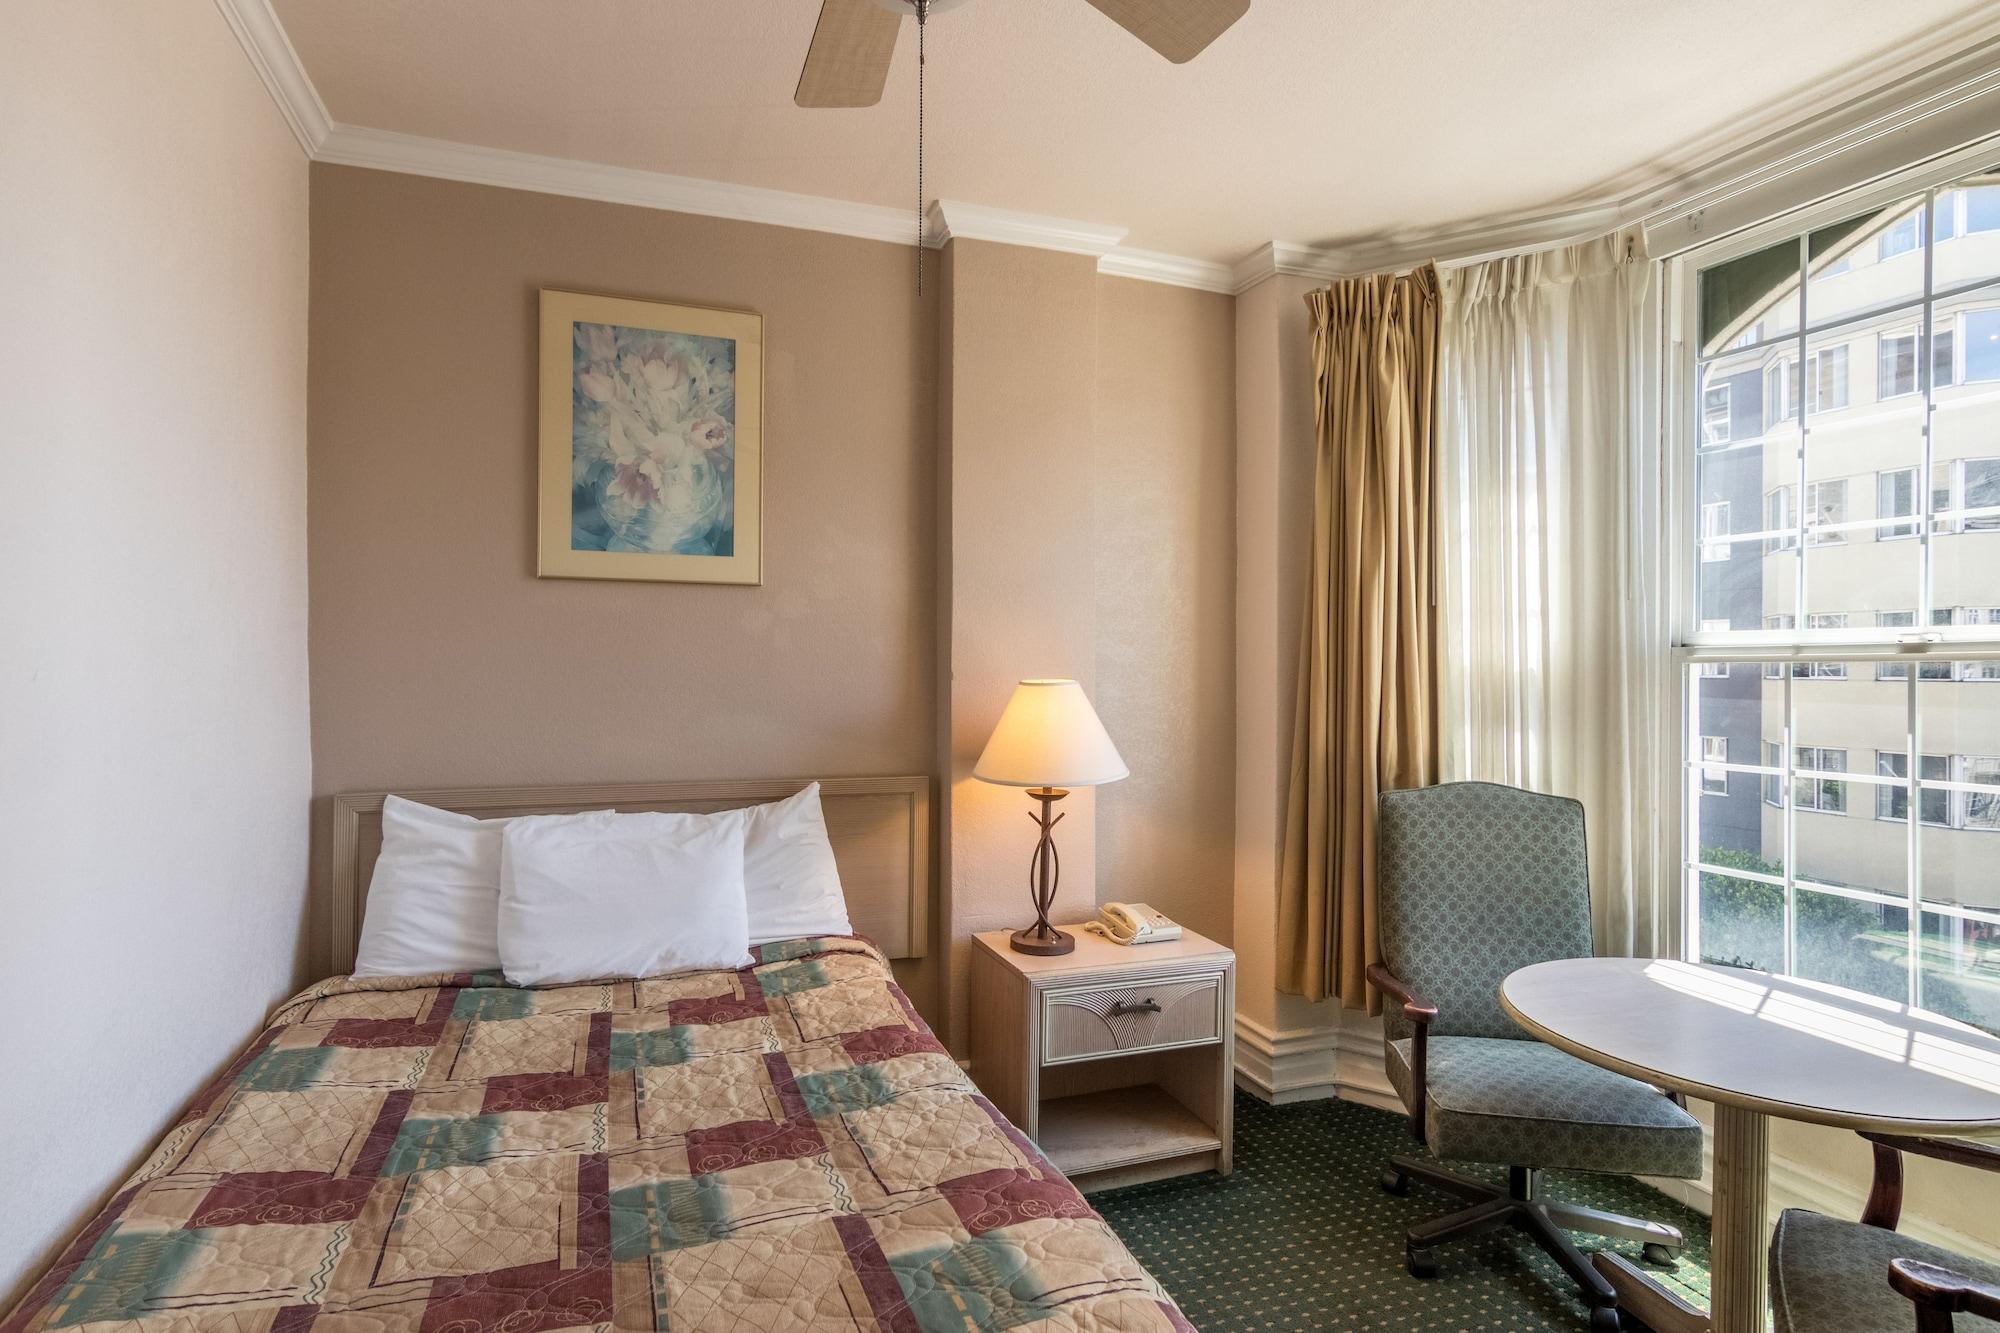 Mithila San Francisco - Surestay Collection By Best Western Экстерьер фото